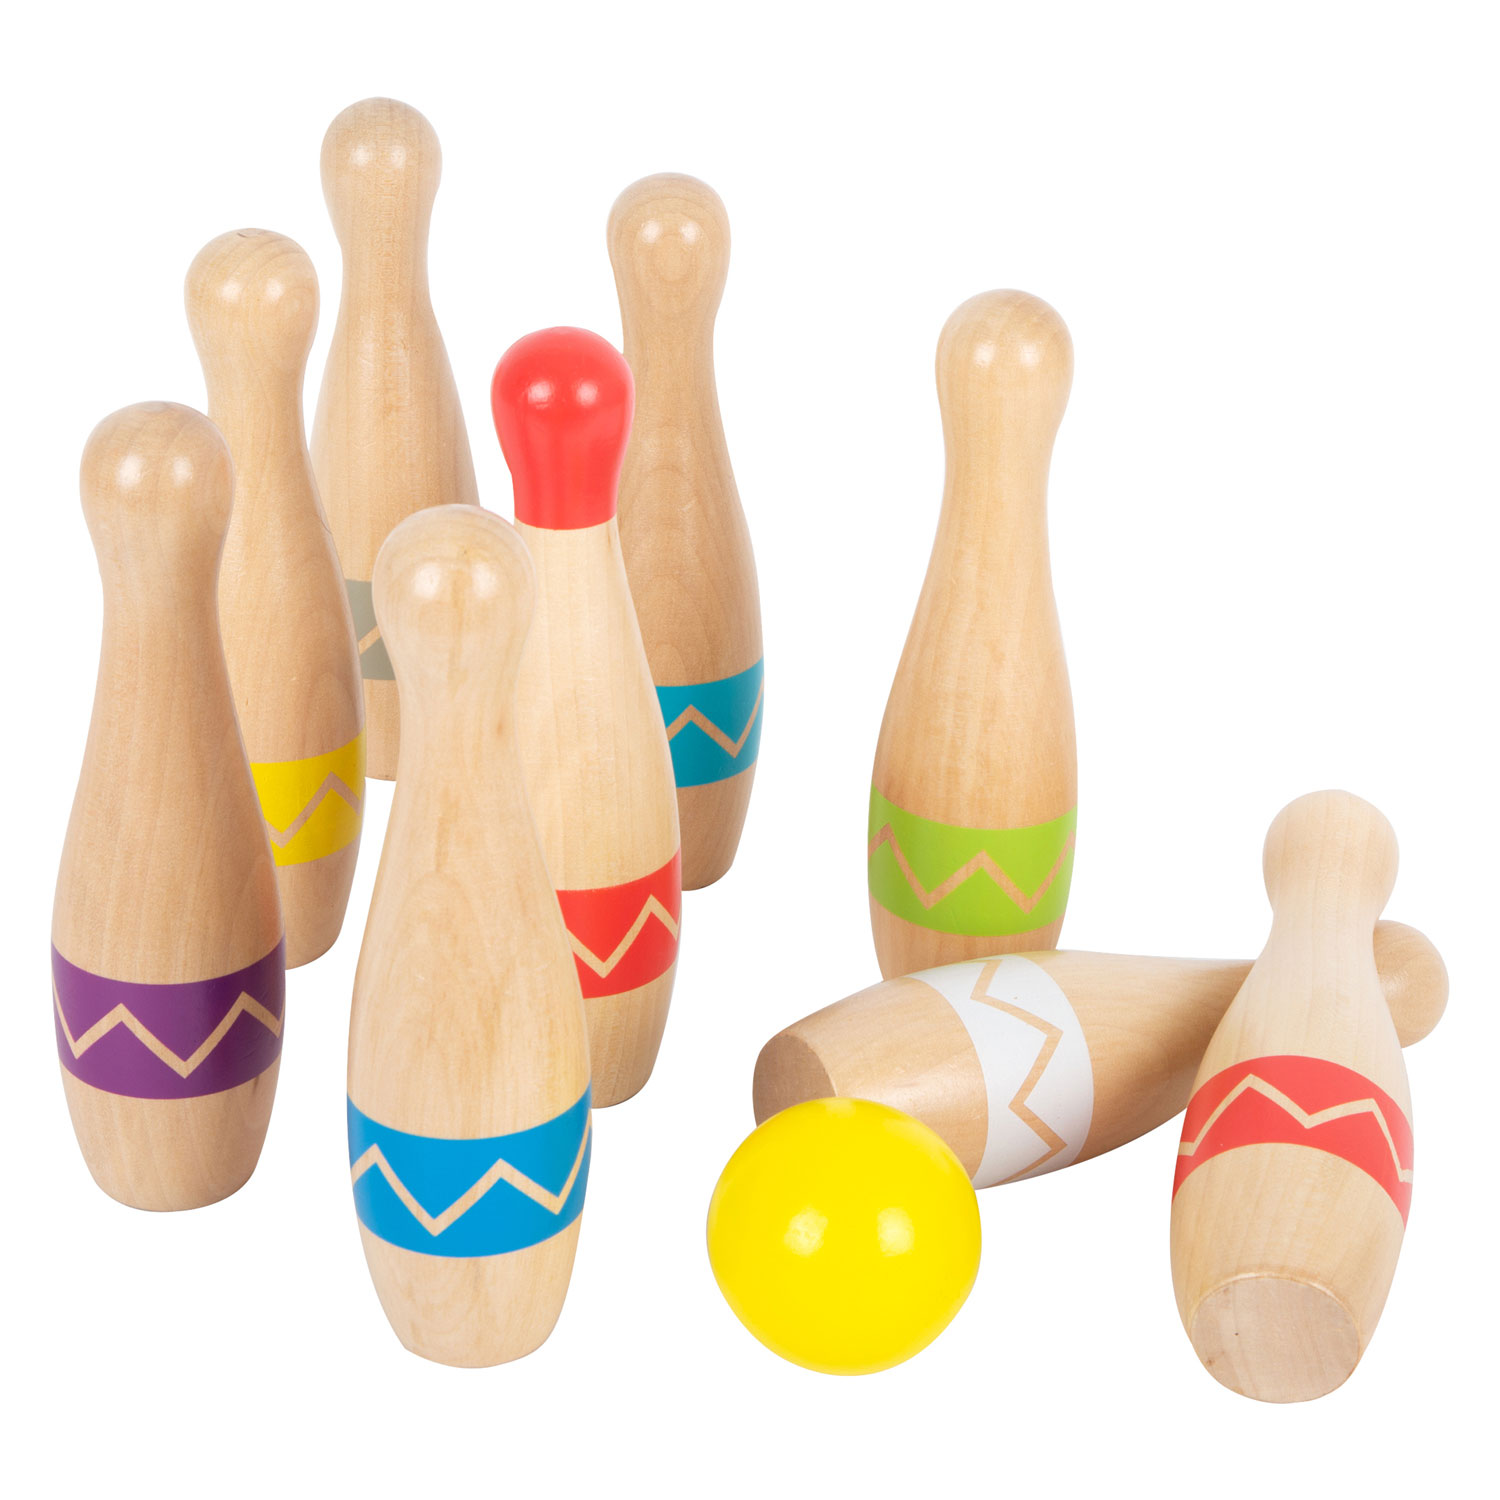 Small Foot - Bowlingspiel aus Holz mit Zick-Zack-Muster, 11-tlg.